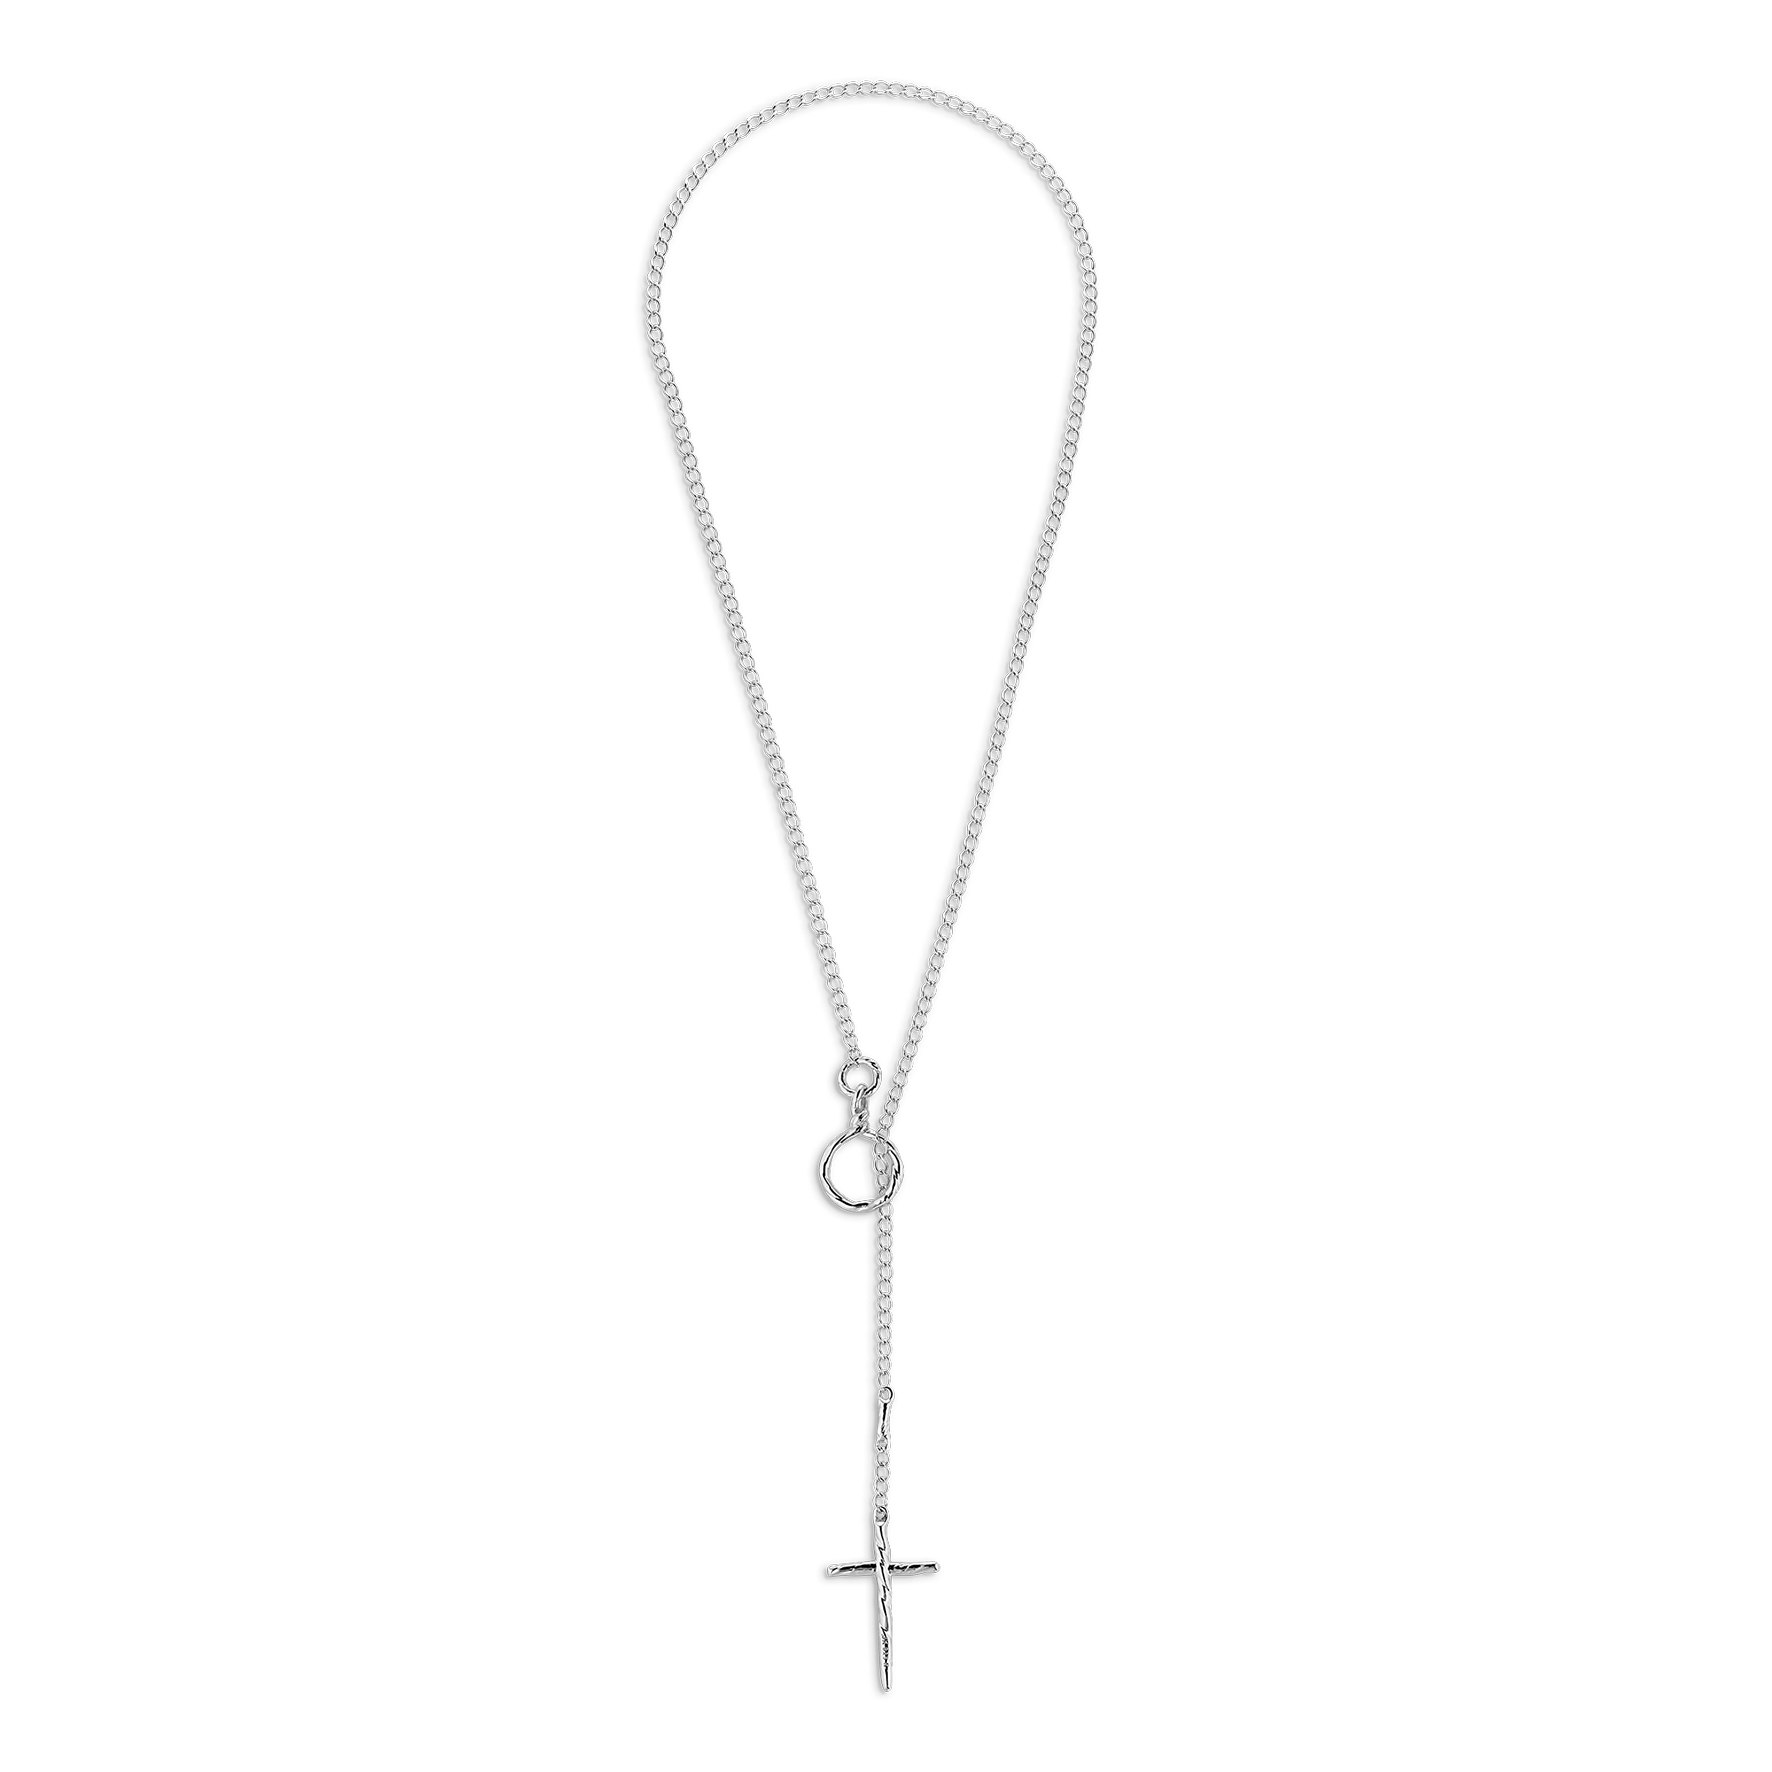 Toggle Cross Necklace from Jane Kønig in Silver Sterling 925